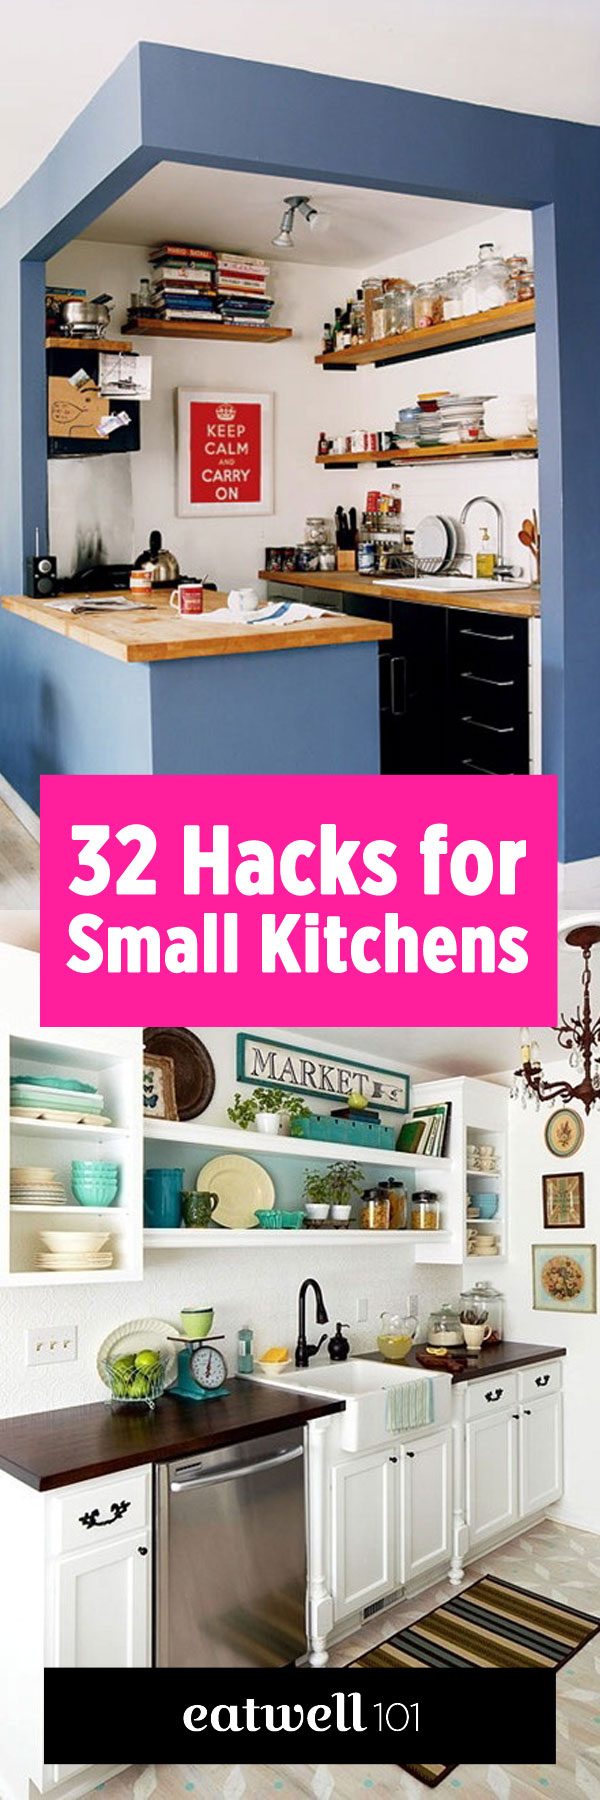 Make a Small Kitchen Layout Feel Bigger With Clever Design Tricks